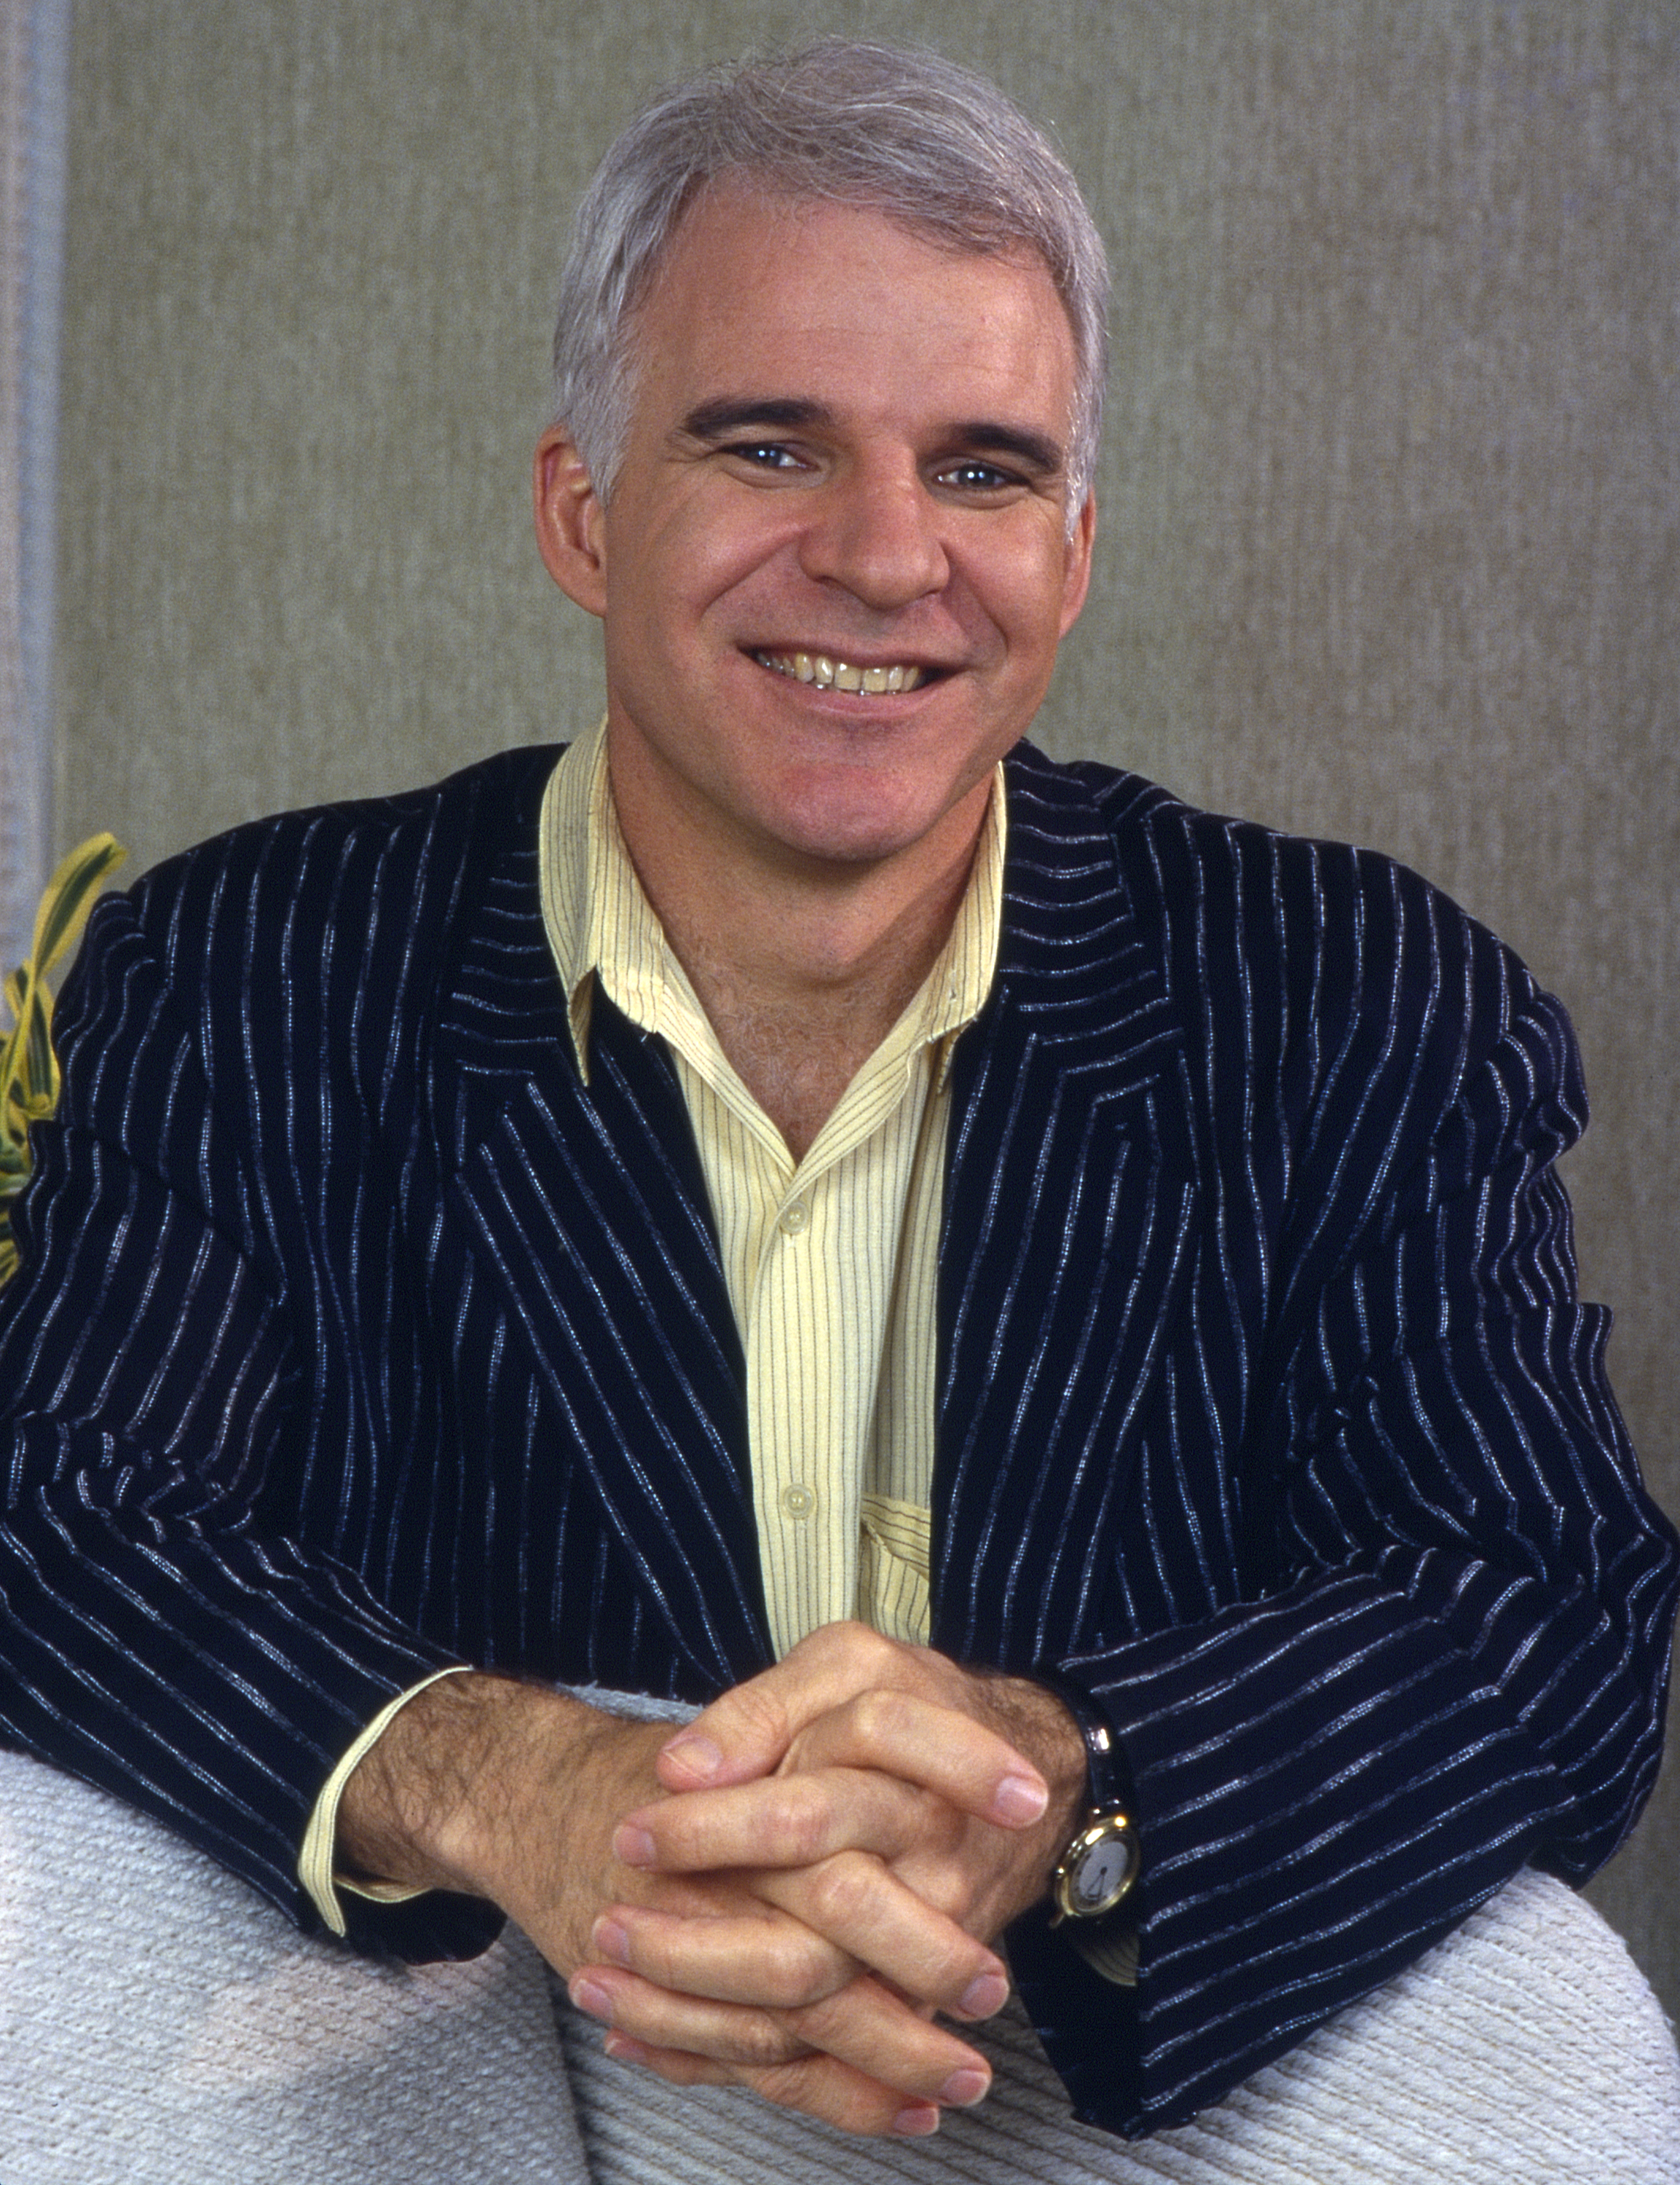 Steve Martin in Los Angeles, California, on November 7, 1986. | Source: Getty Images